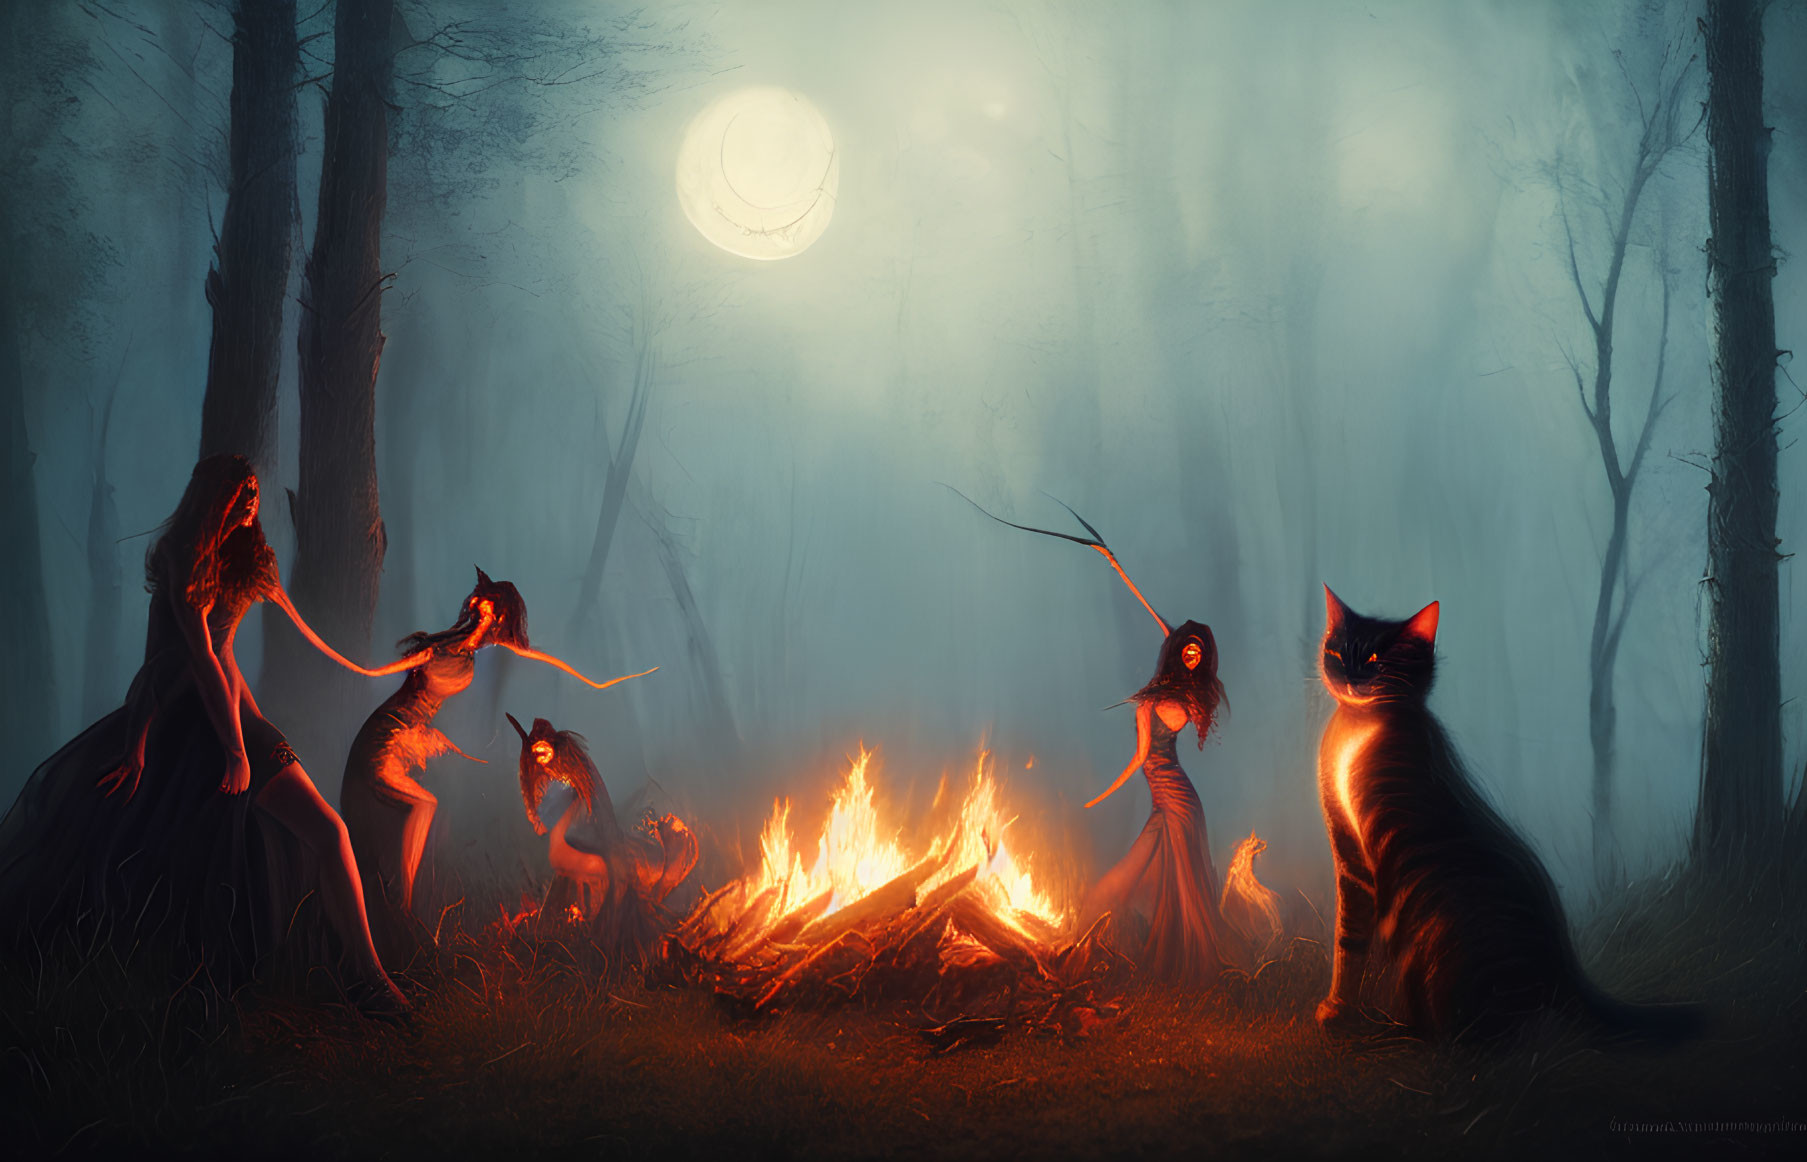 Women dancing near bonfire in mystical forest with giant cats under full moon